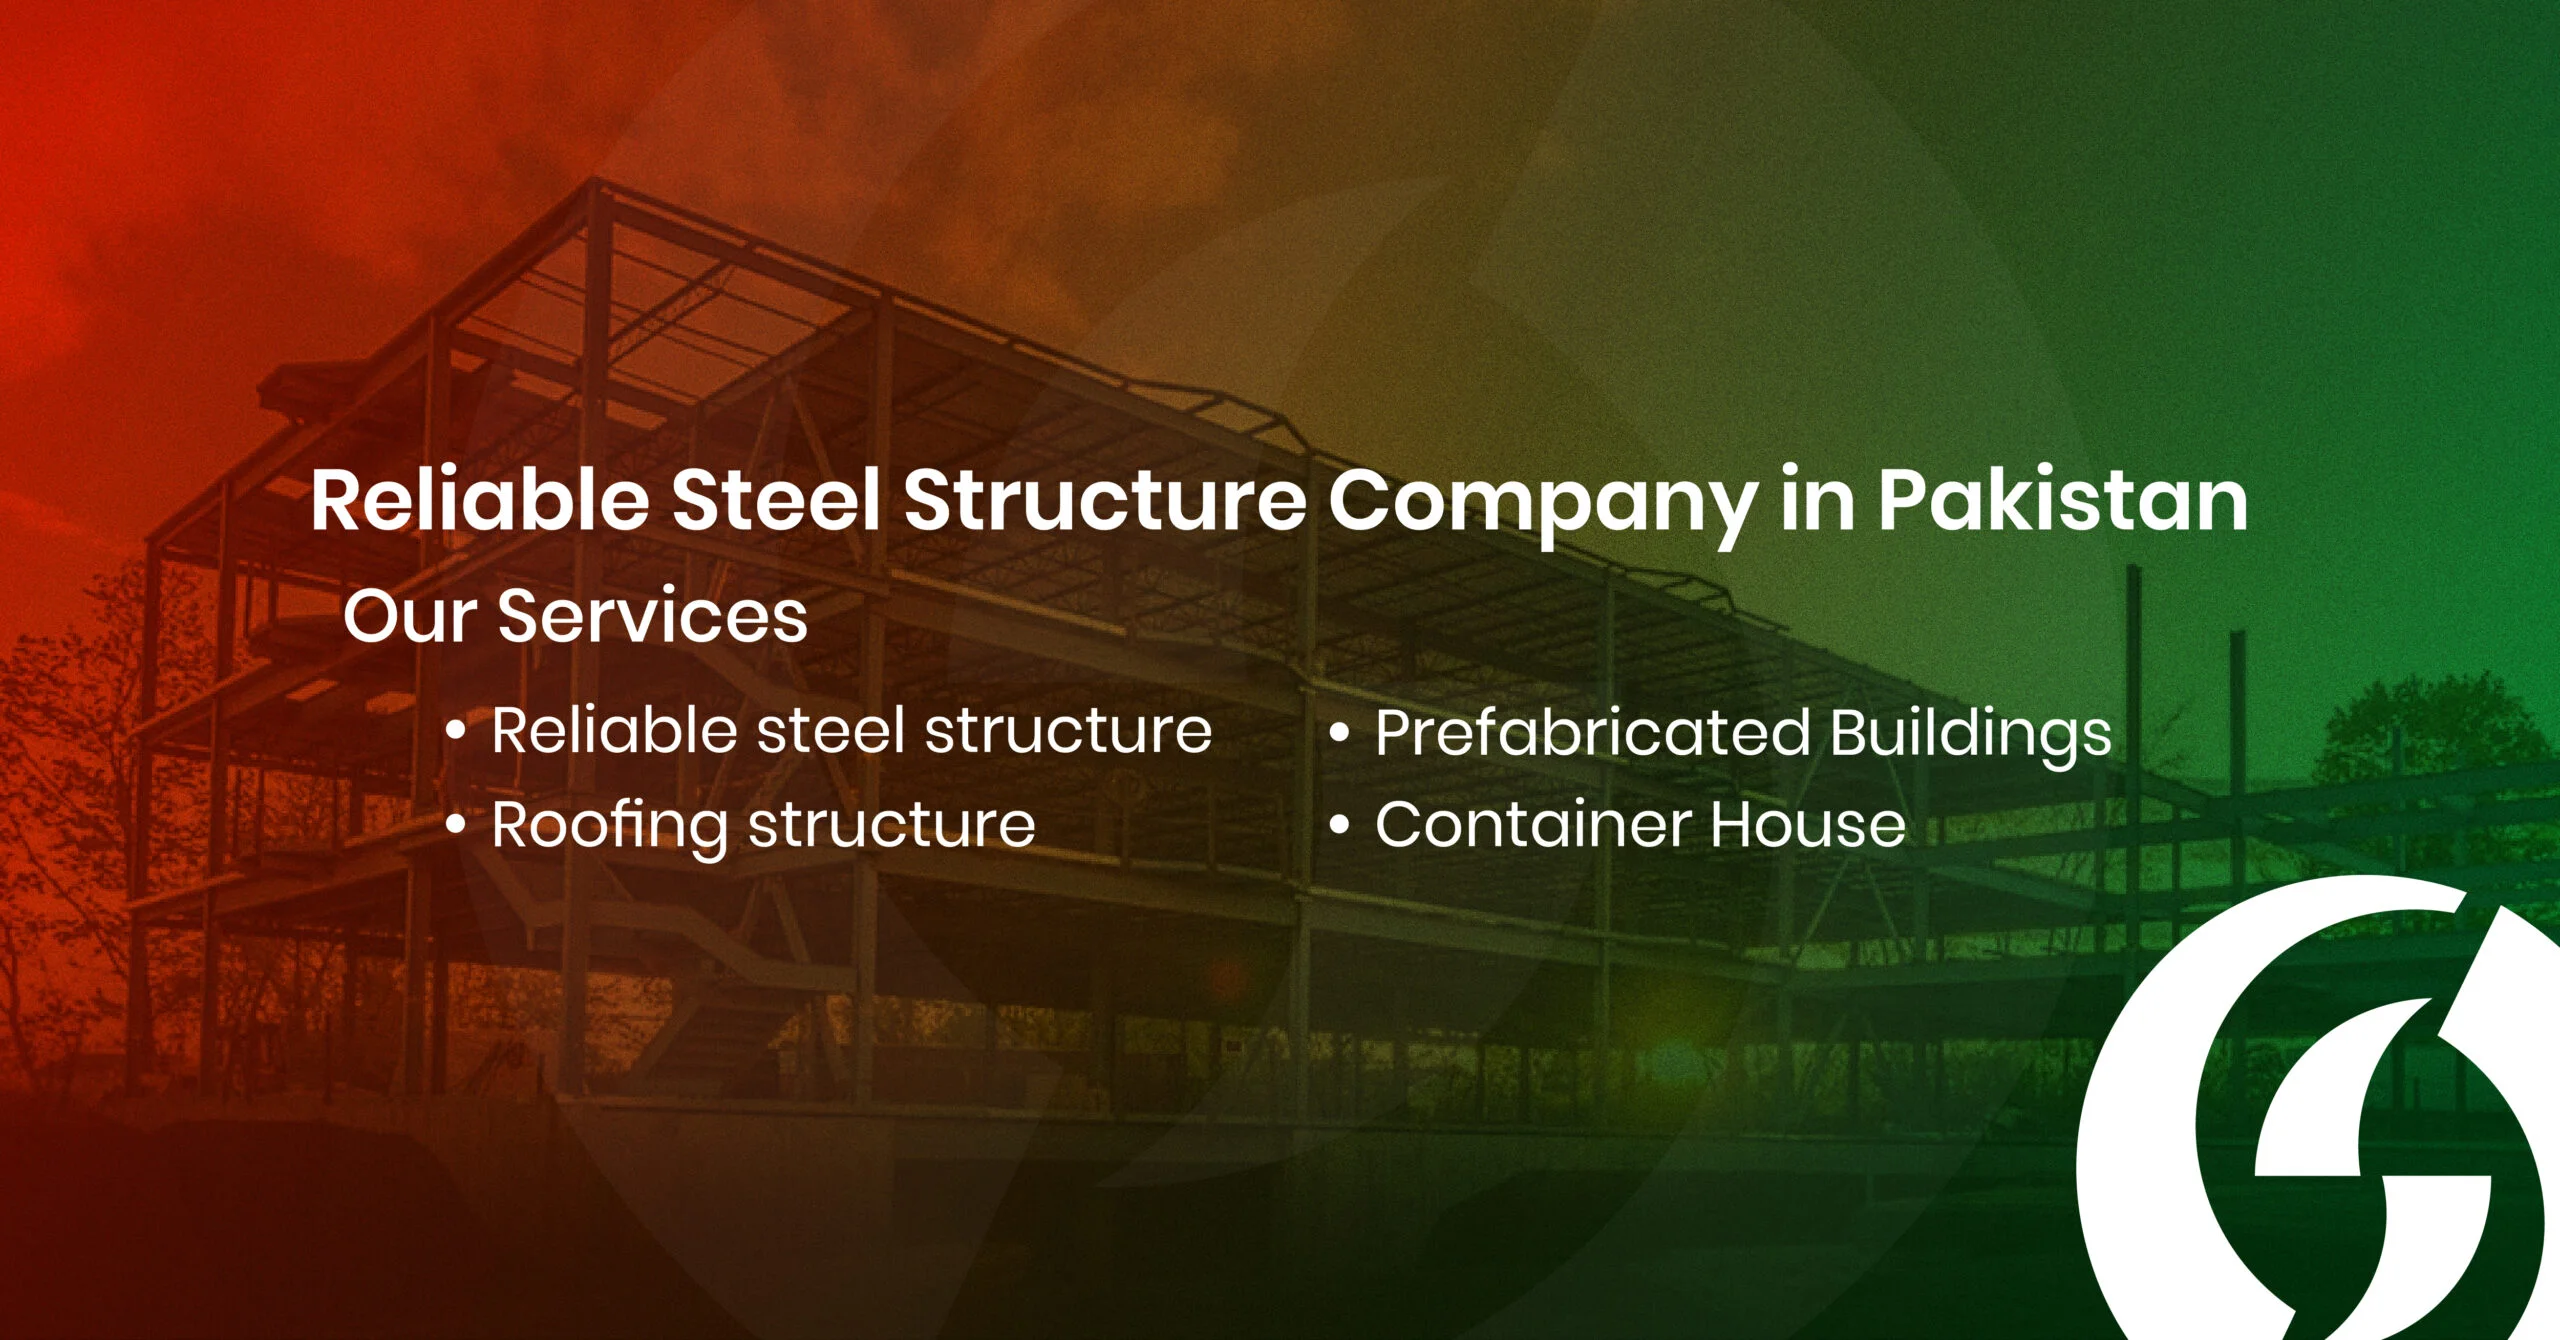 Reliable Steel Structure Company in Pakistan